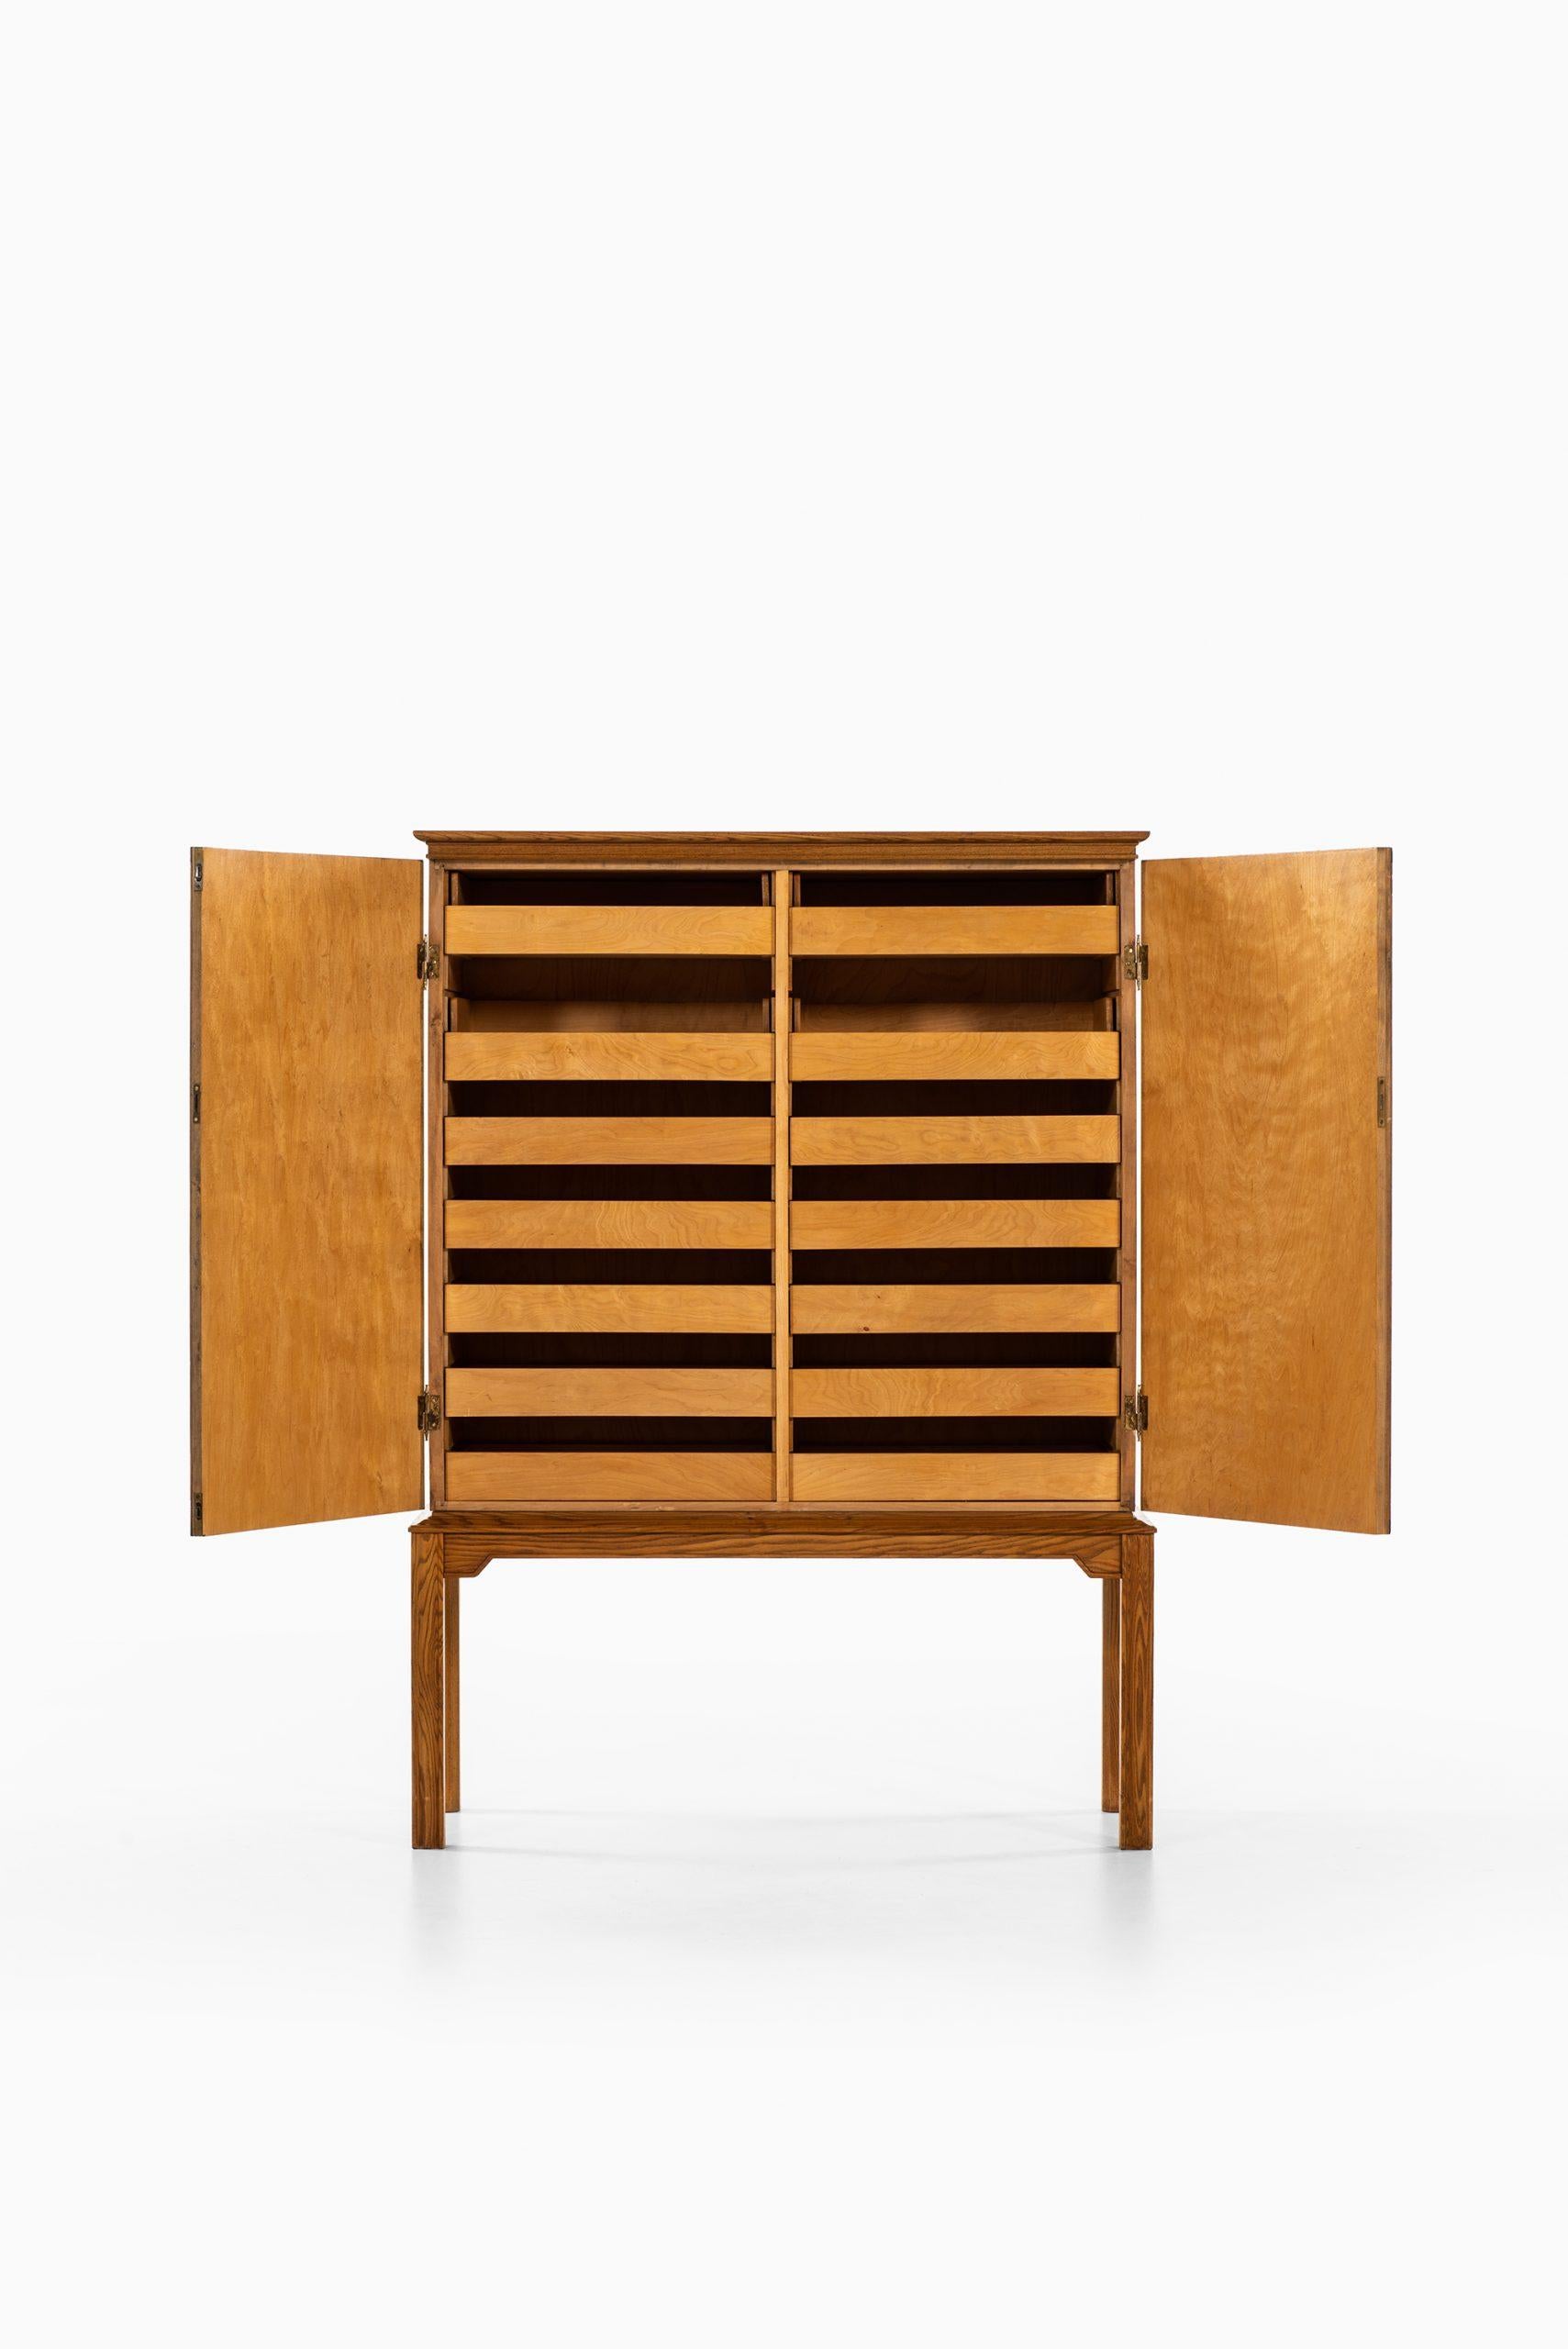 Mid-20th Century Oscar Nilsson Cabinet Produced in Sweden